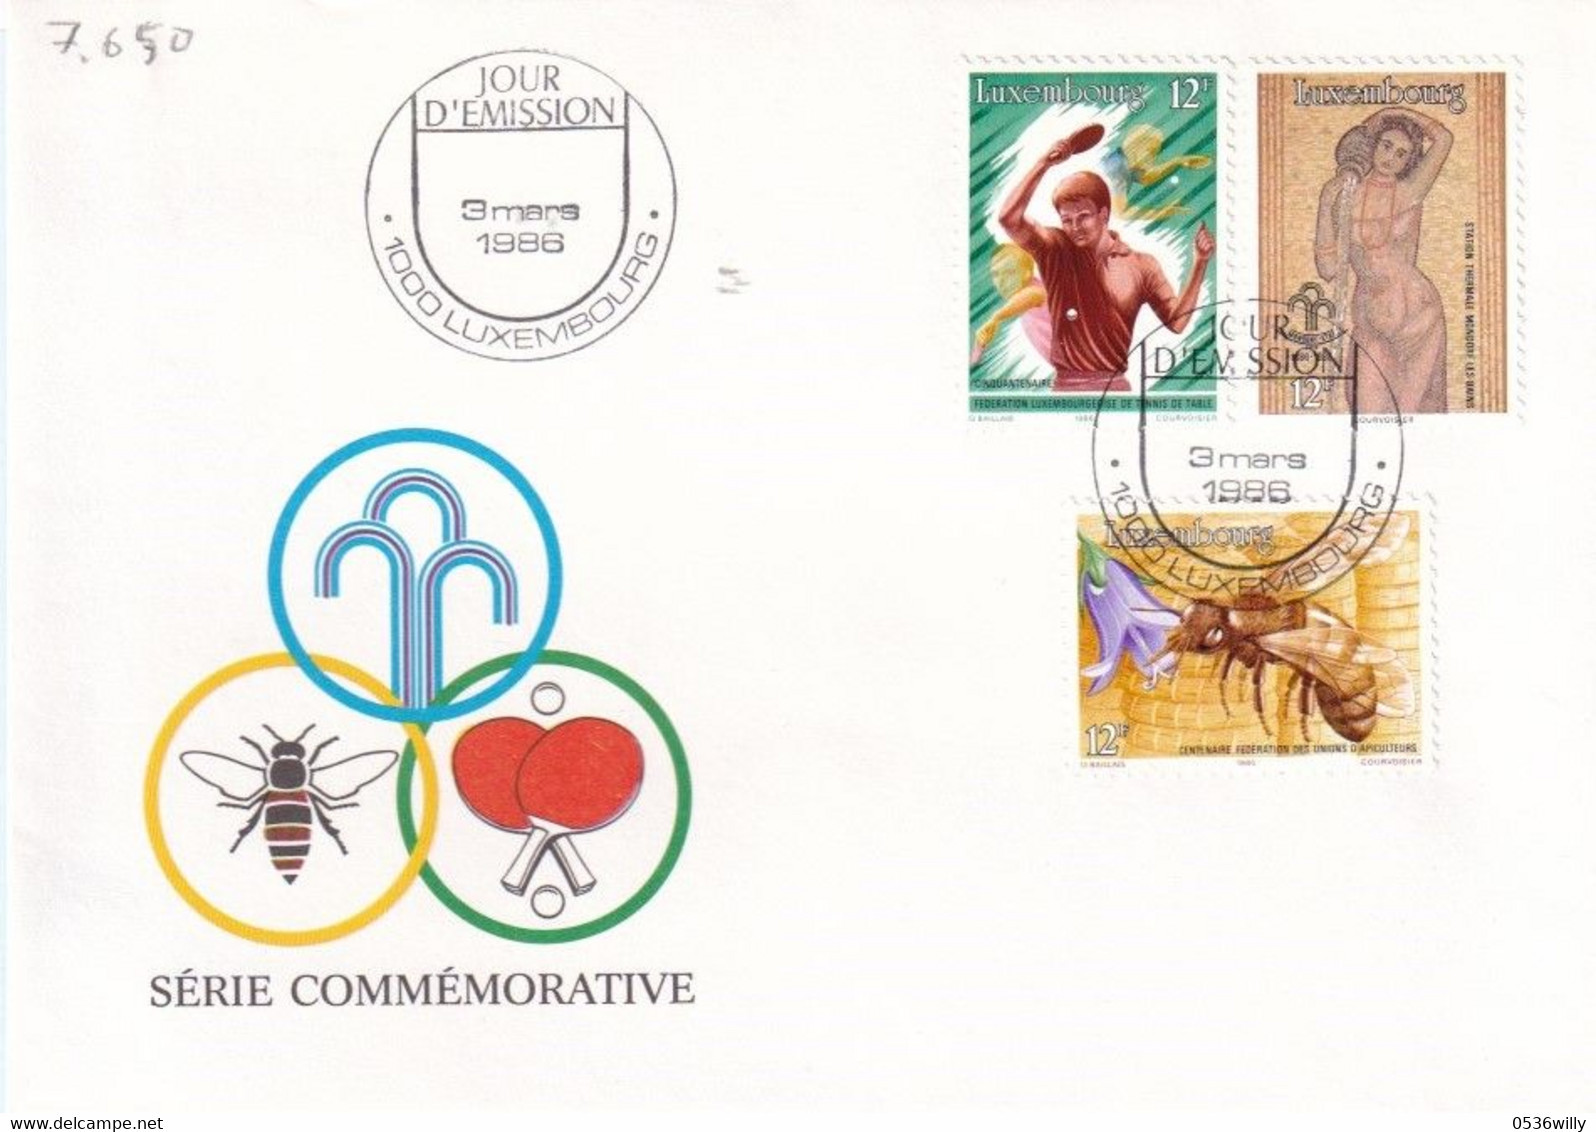 Luxembourg 1986 - FDC Jahresereignisse (7.650) - Covers & Documents